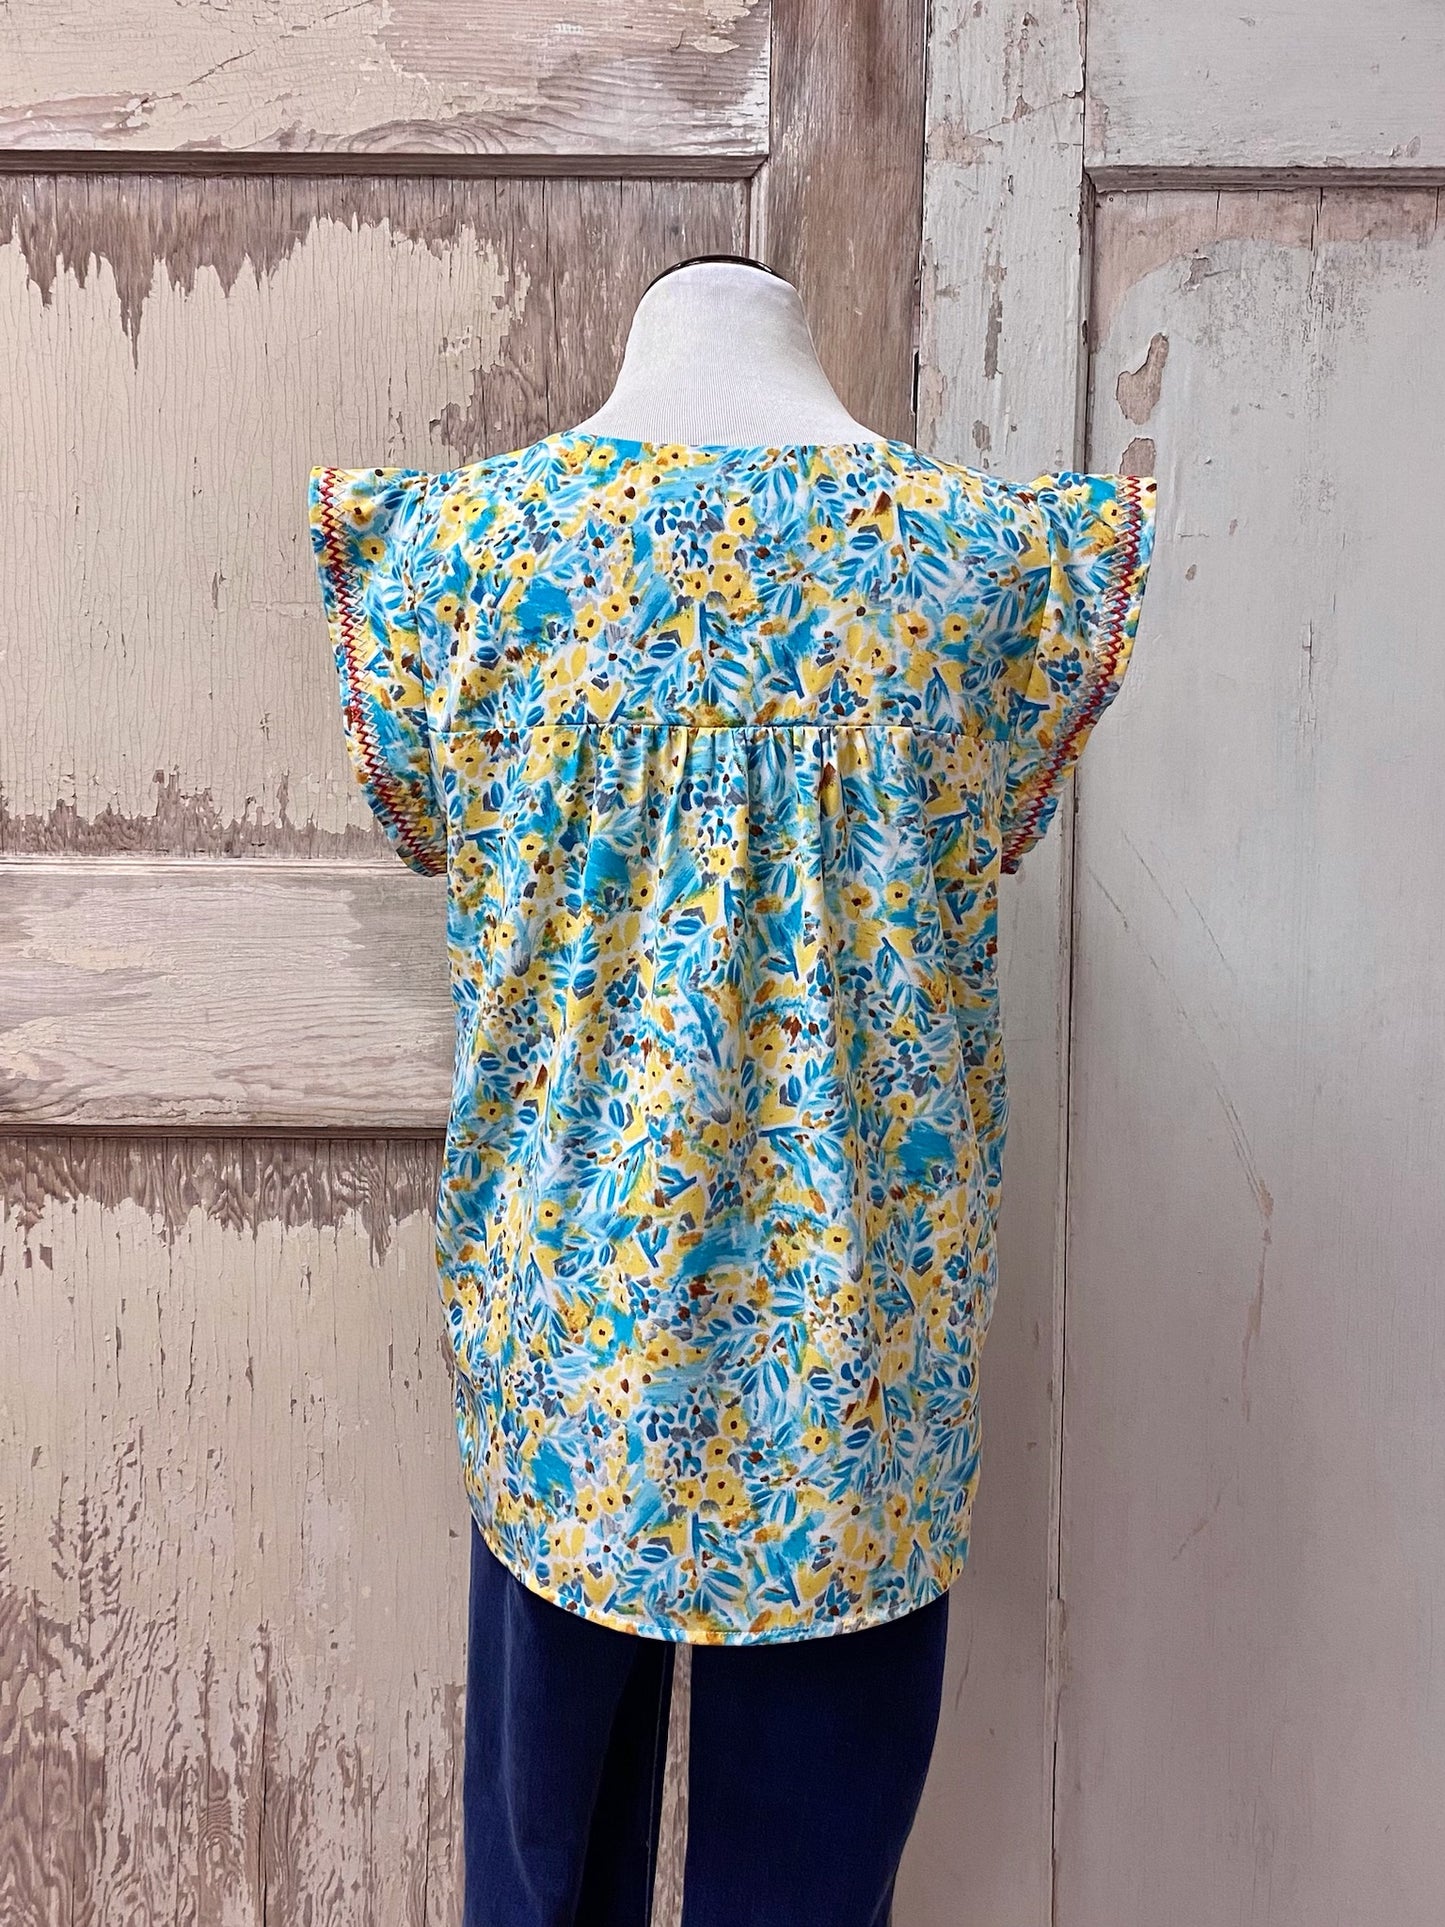 Teal Embroidered Top | S-3XL